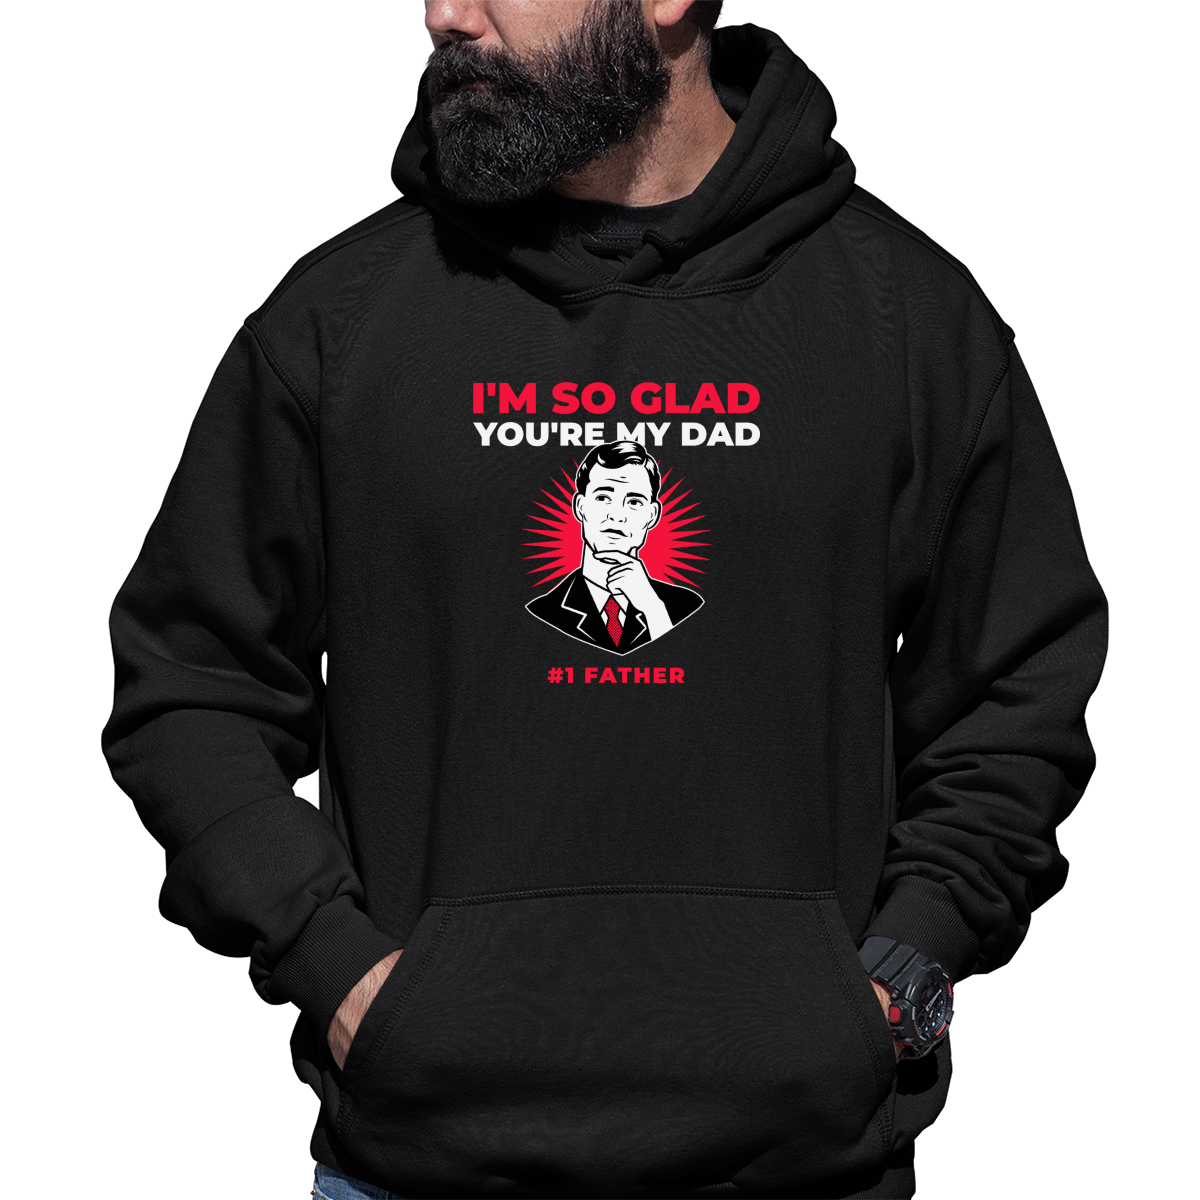 I'm so glad you are my dad Unisex Hoodie | Black